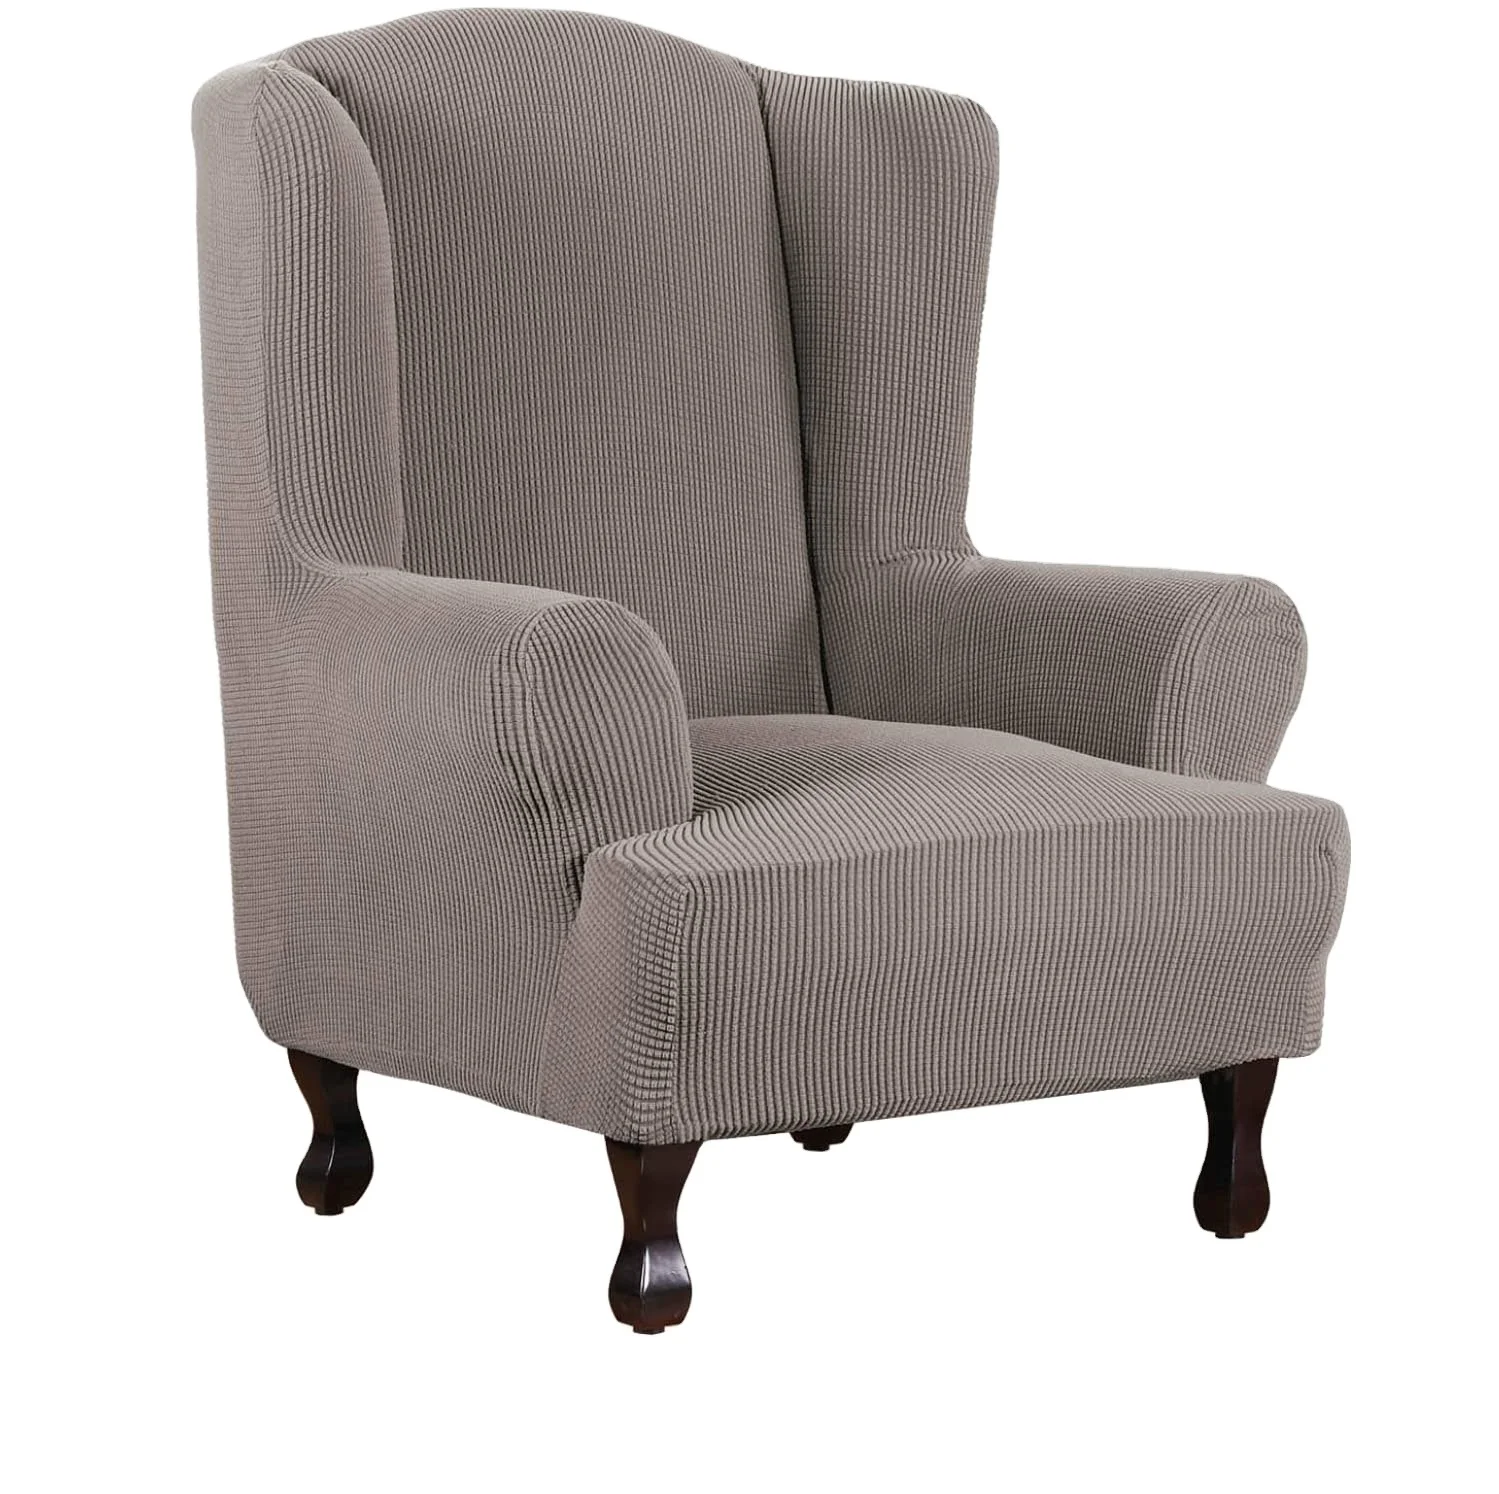 Elegant Wing Chair Sofa Slipcover 2 Pieces Wing Back Chair Sofa Cover ...